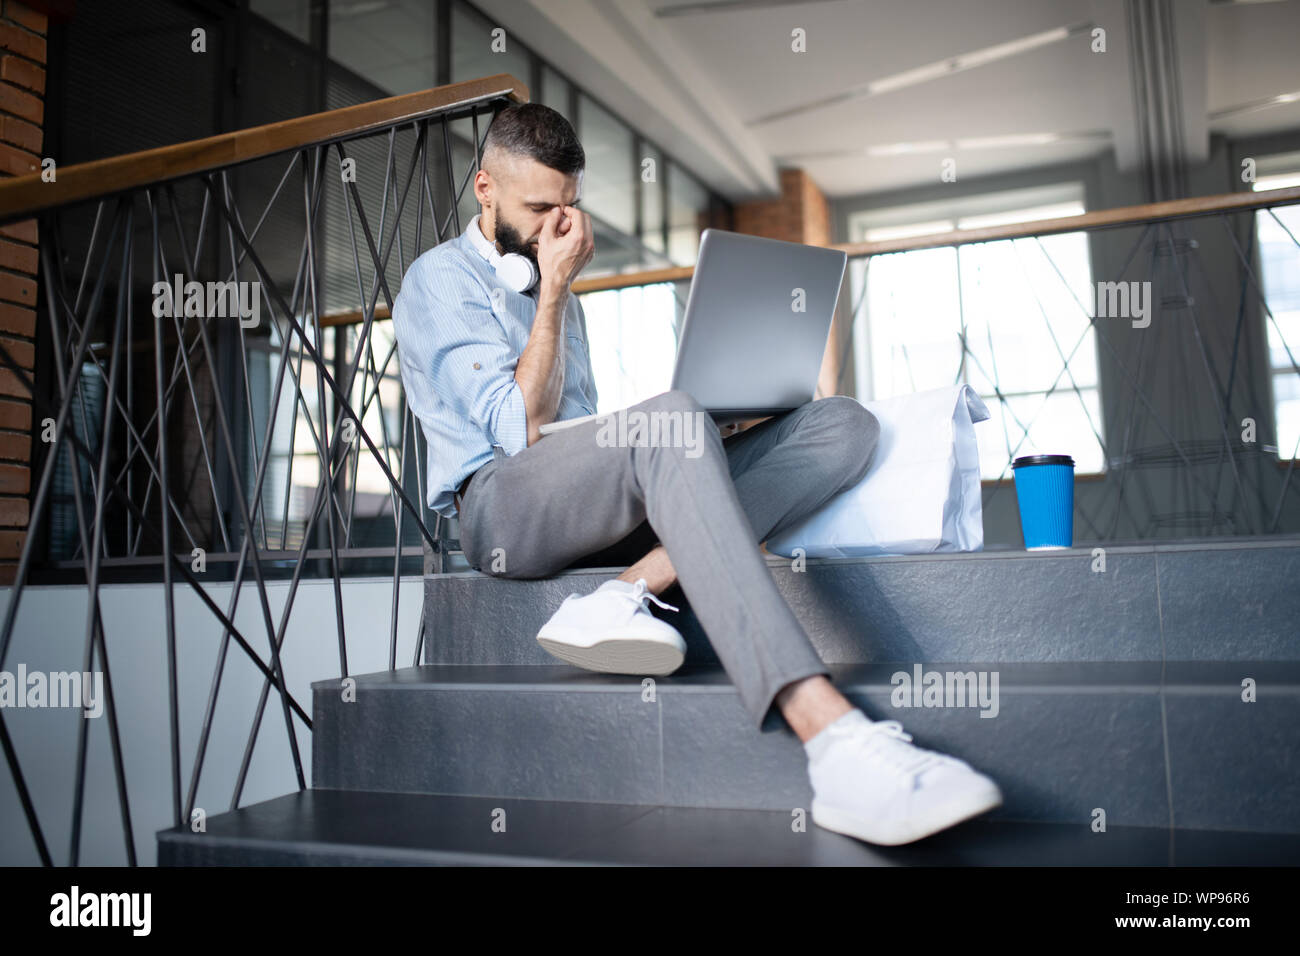 Freelancer feeling sleepy after working for too long Stock Photo